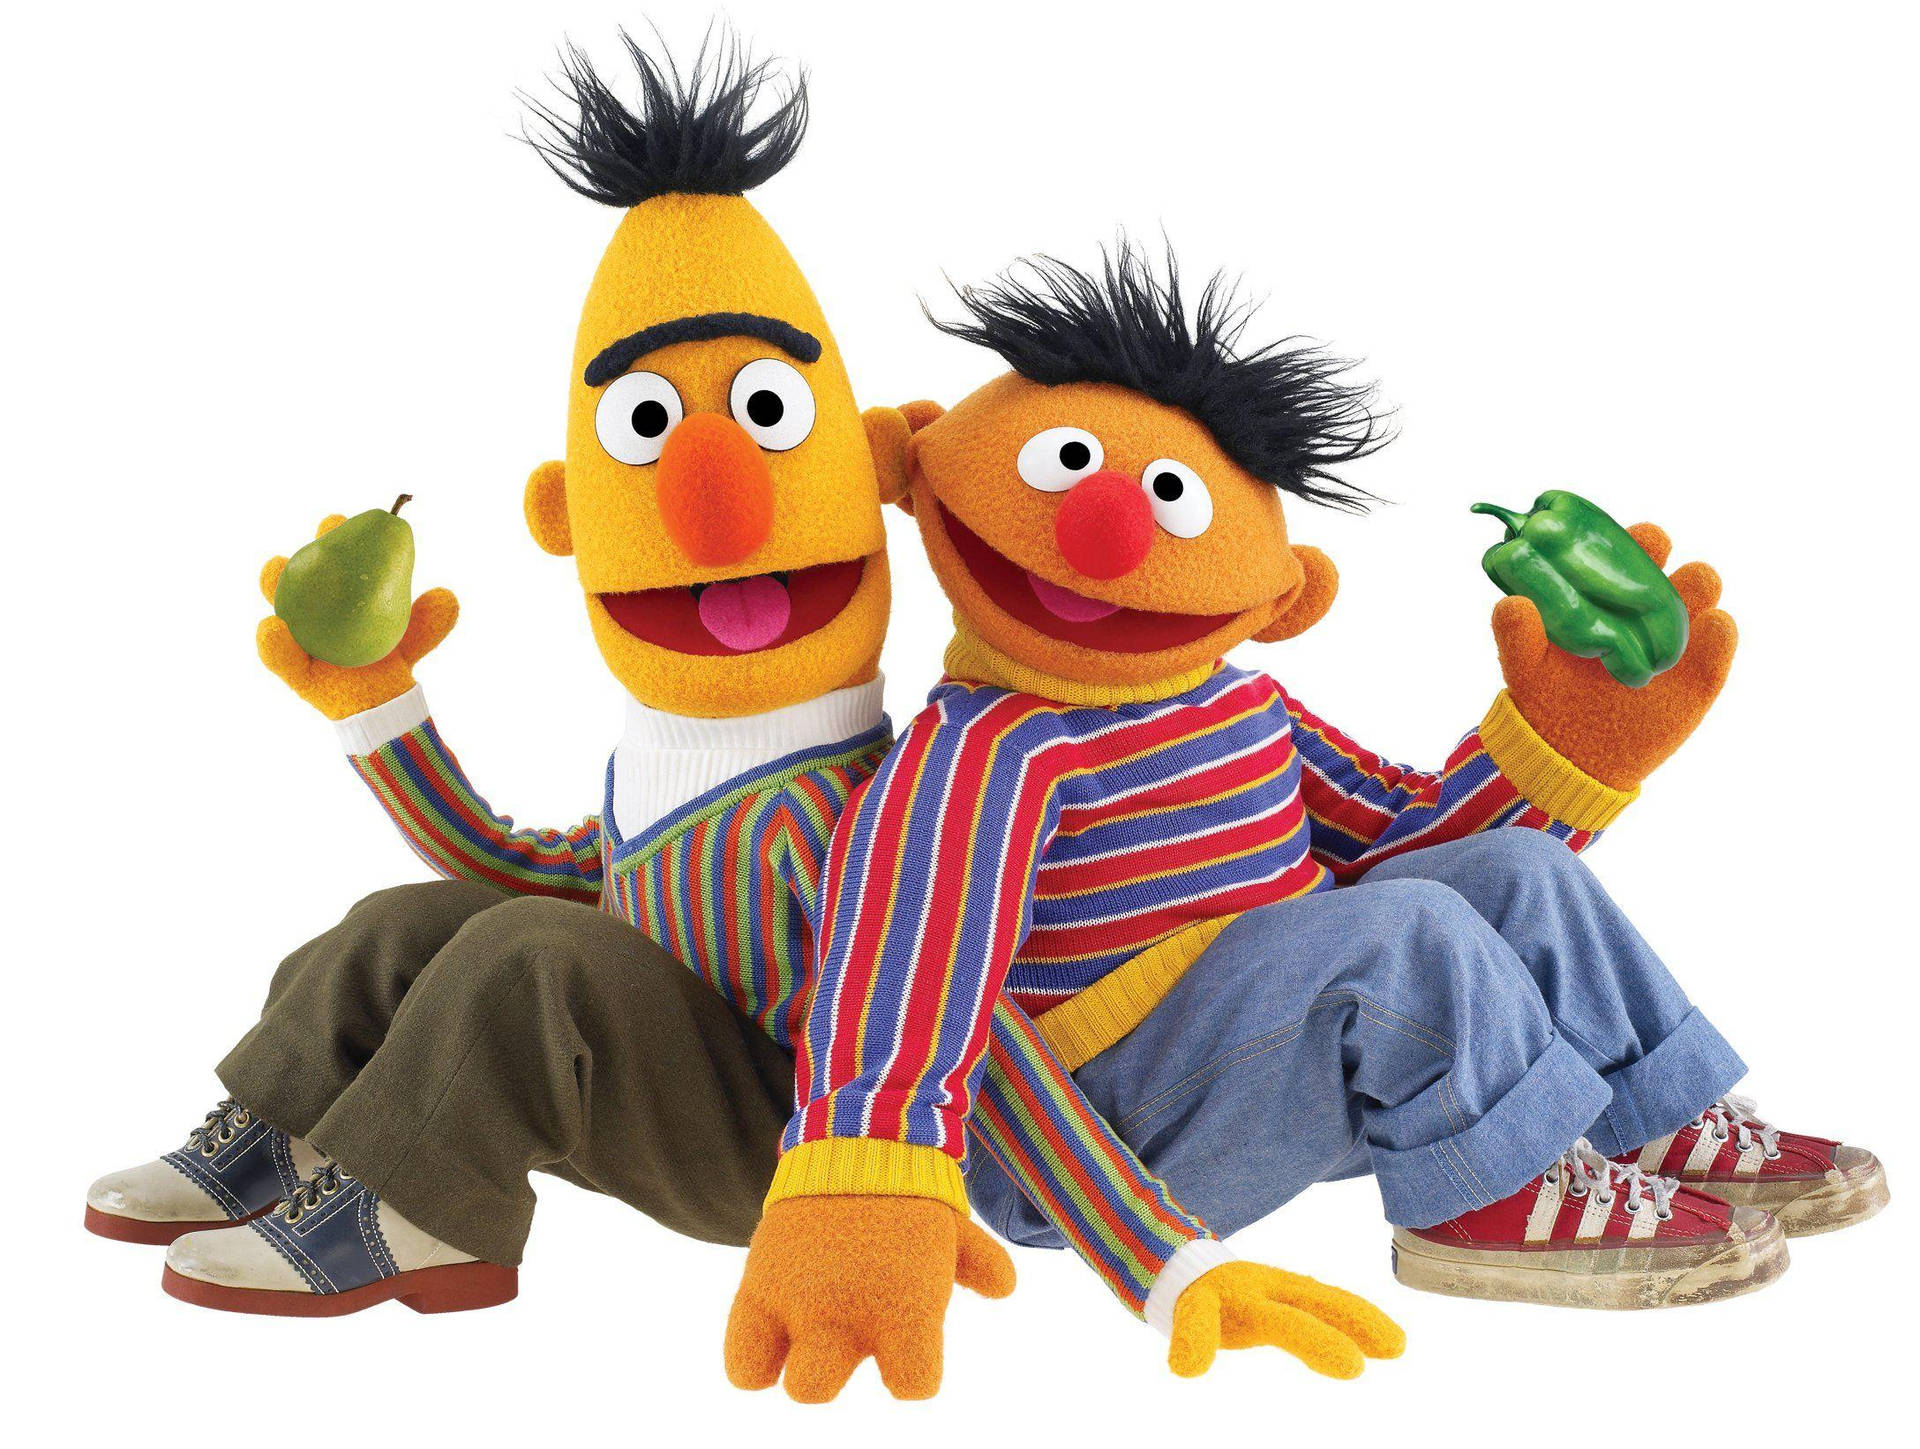 Sesame Street 2176X1642 Wallpaper and Background Image